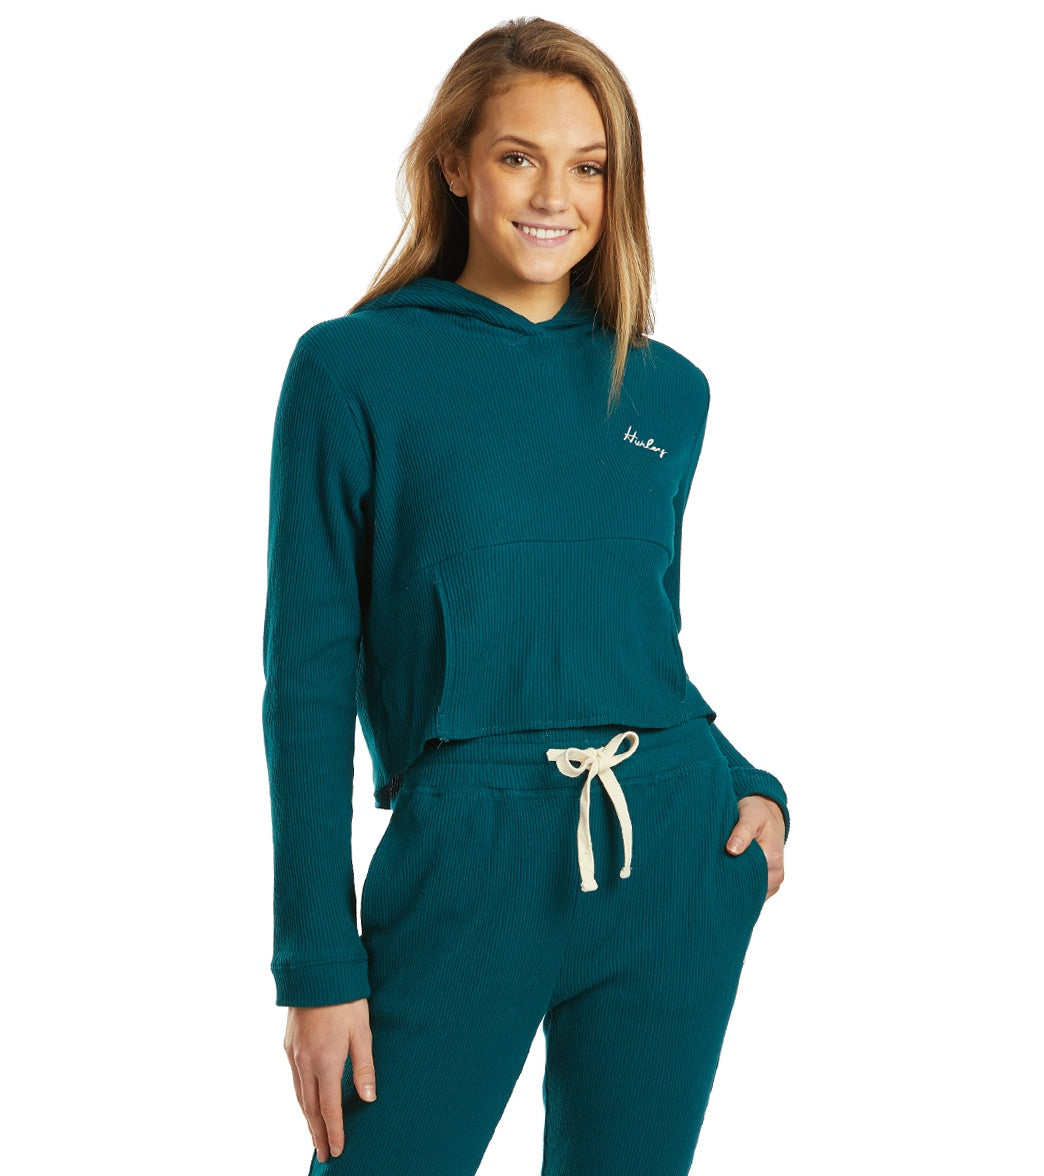 Hurley Women's Chill Rib Fleece Crop Pullover - Midnight Turquoise Small Cotton/Polyester - Swimoutlet.com